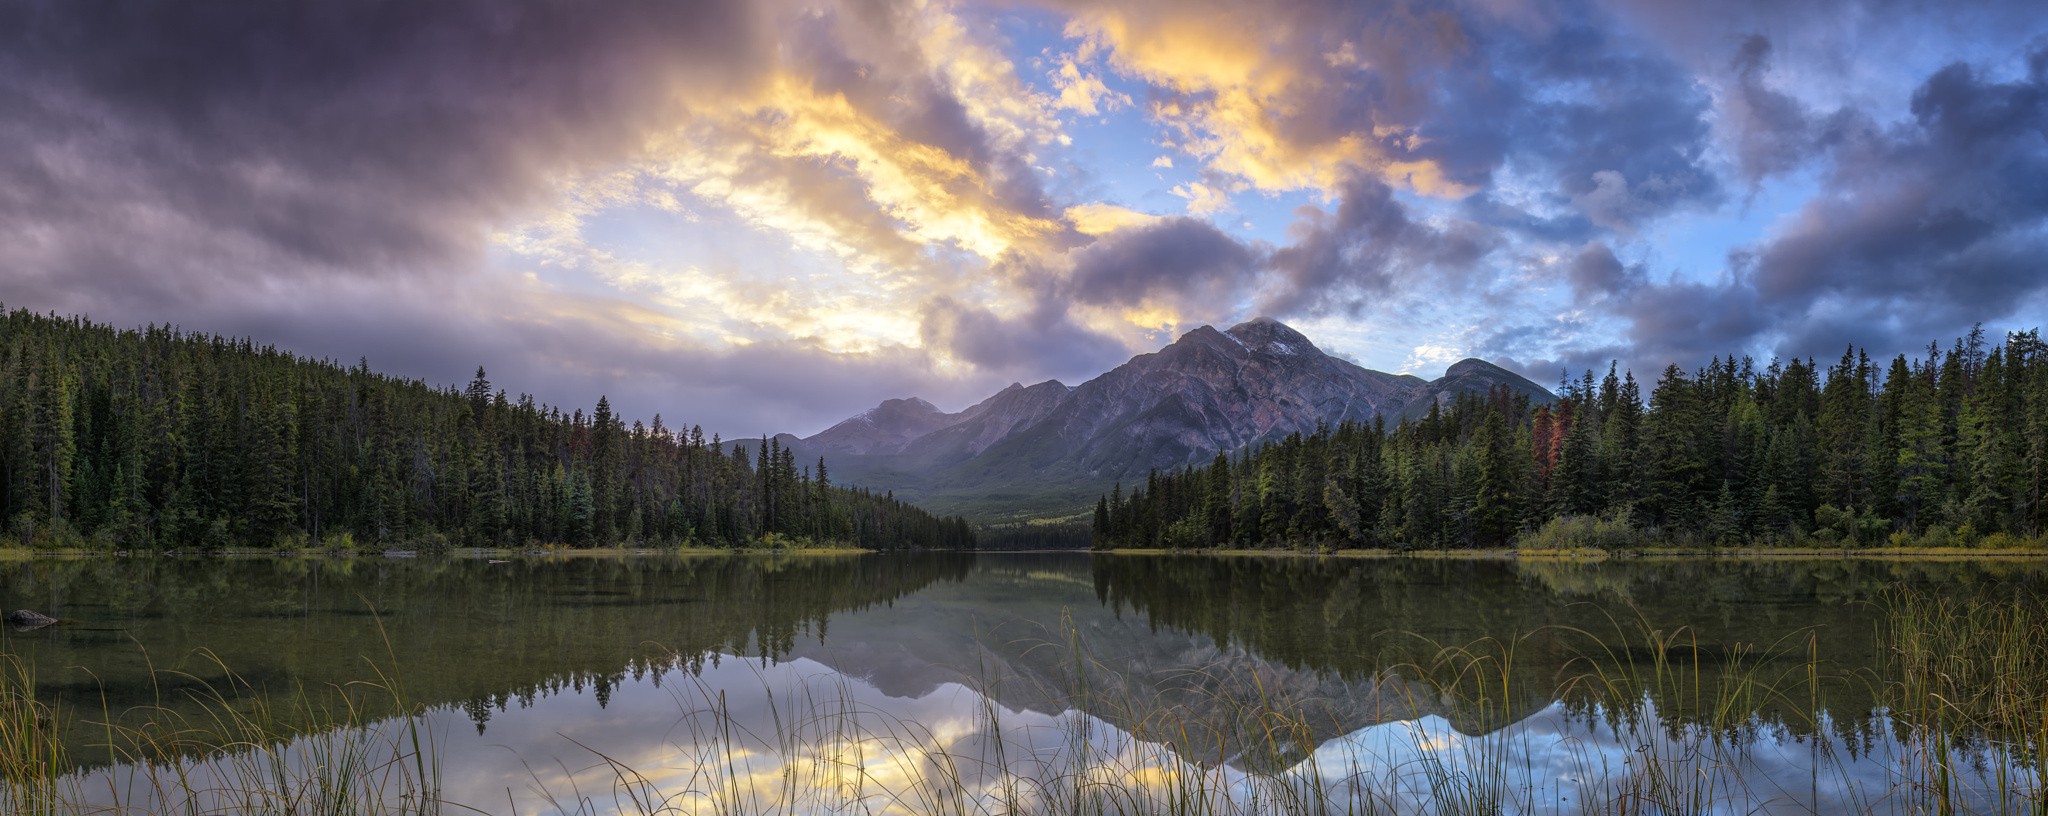 General 2048x816 panorama lake mountains nature sky Jasper National Park Canada landscape forest clouds trees reflection water